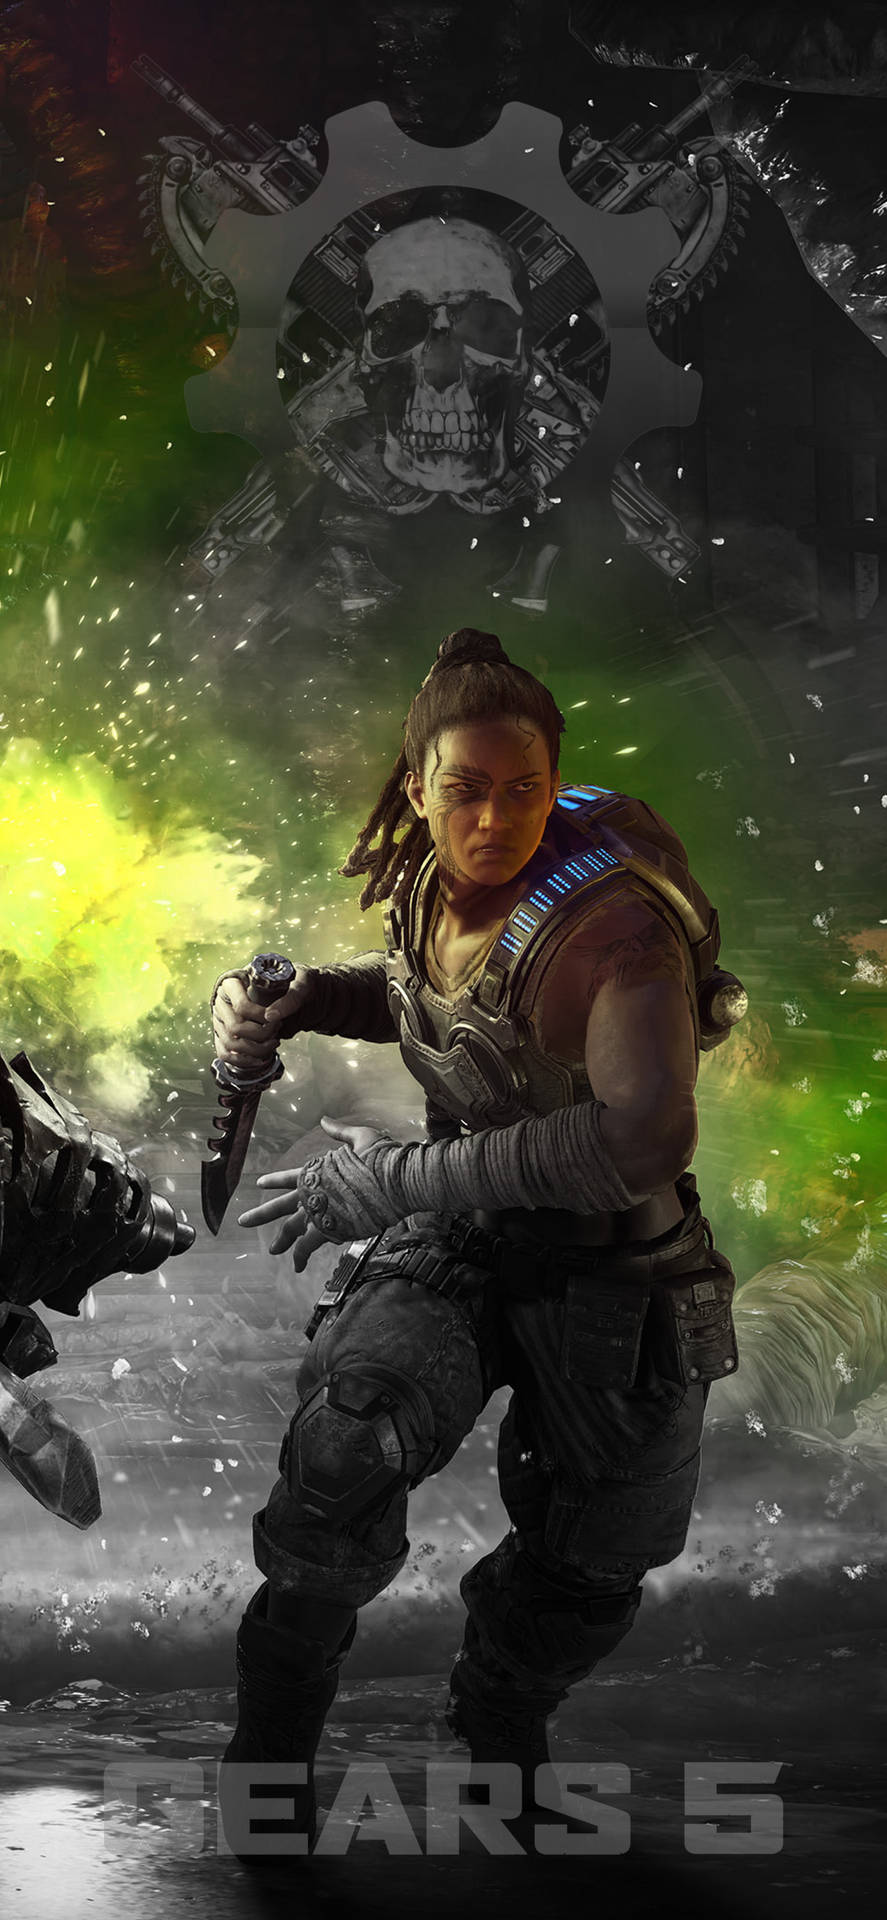 Lahni Kaliso In Dynamic Action - Gears 5 Iphone Wallpaper